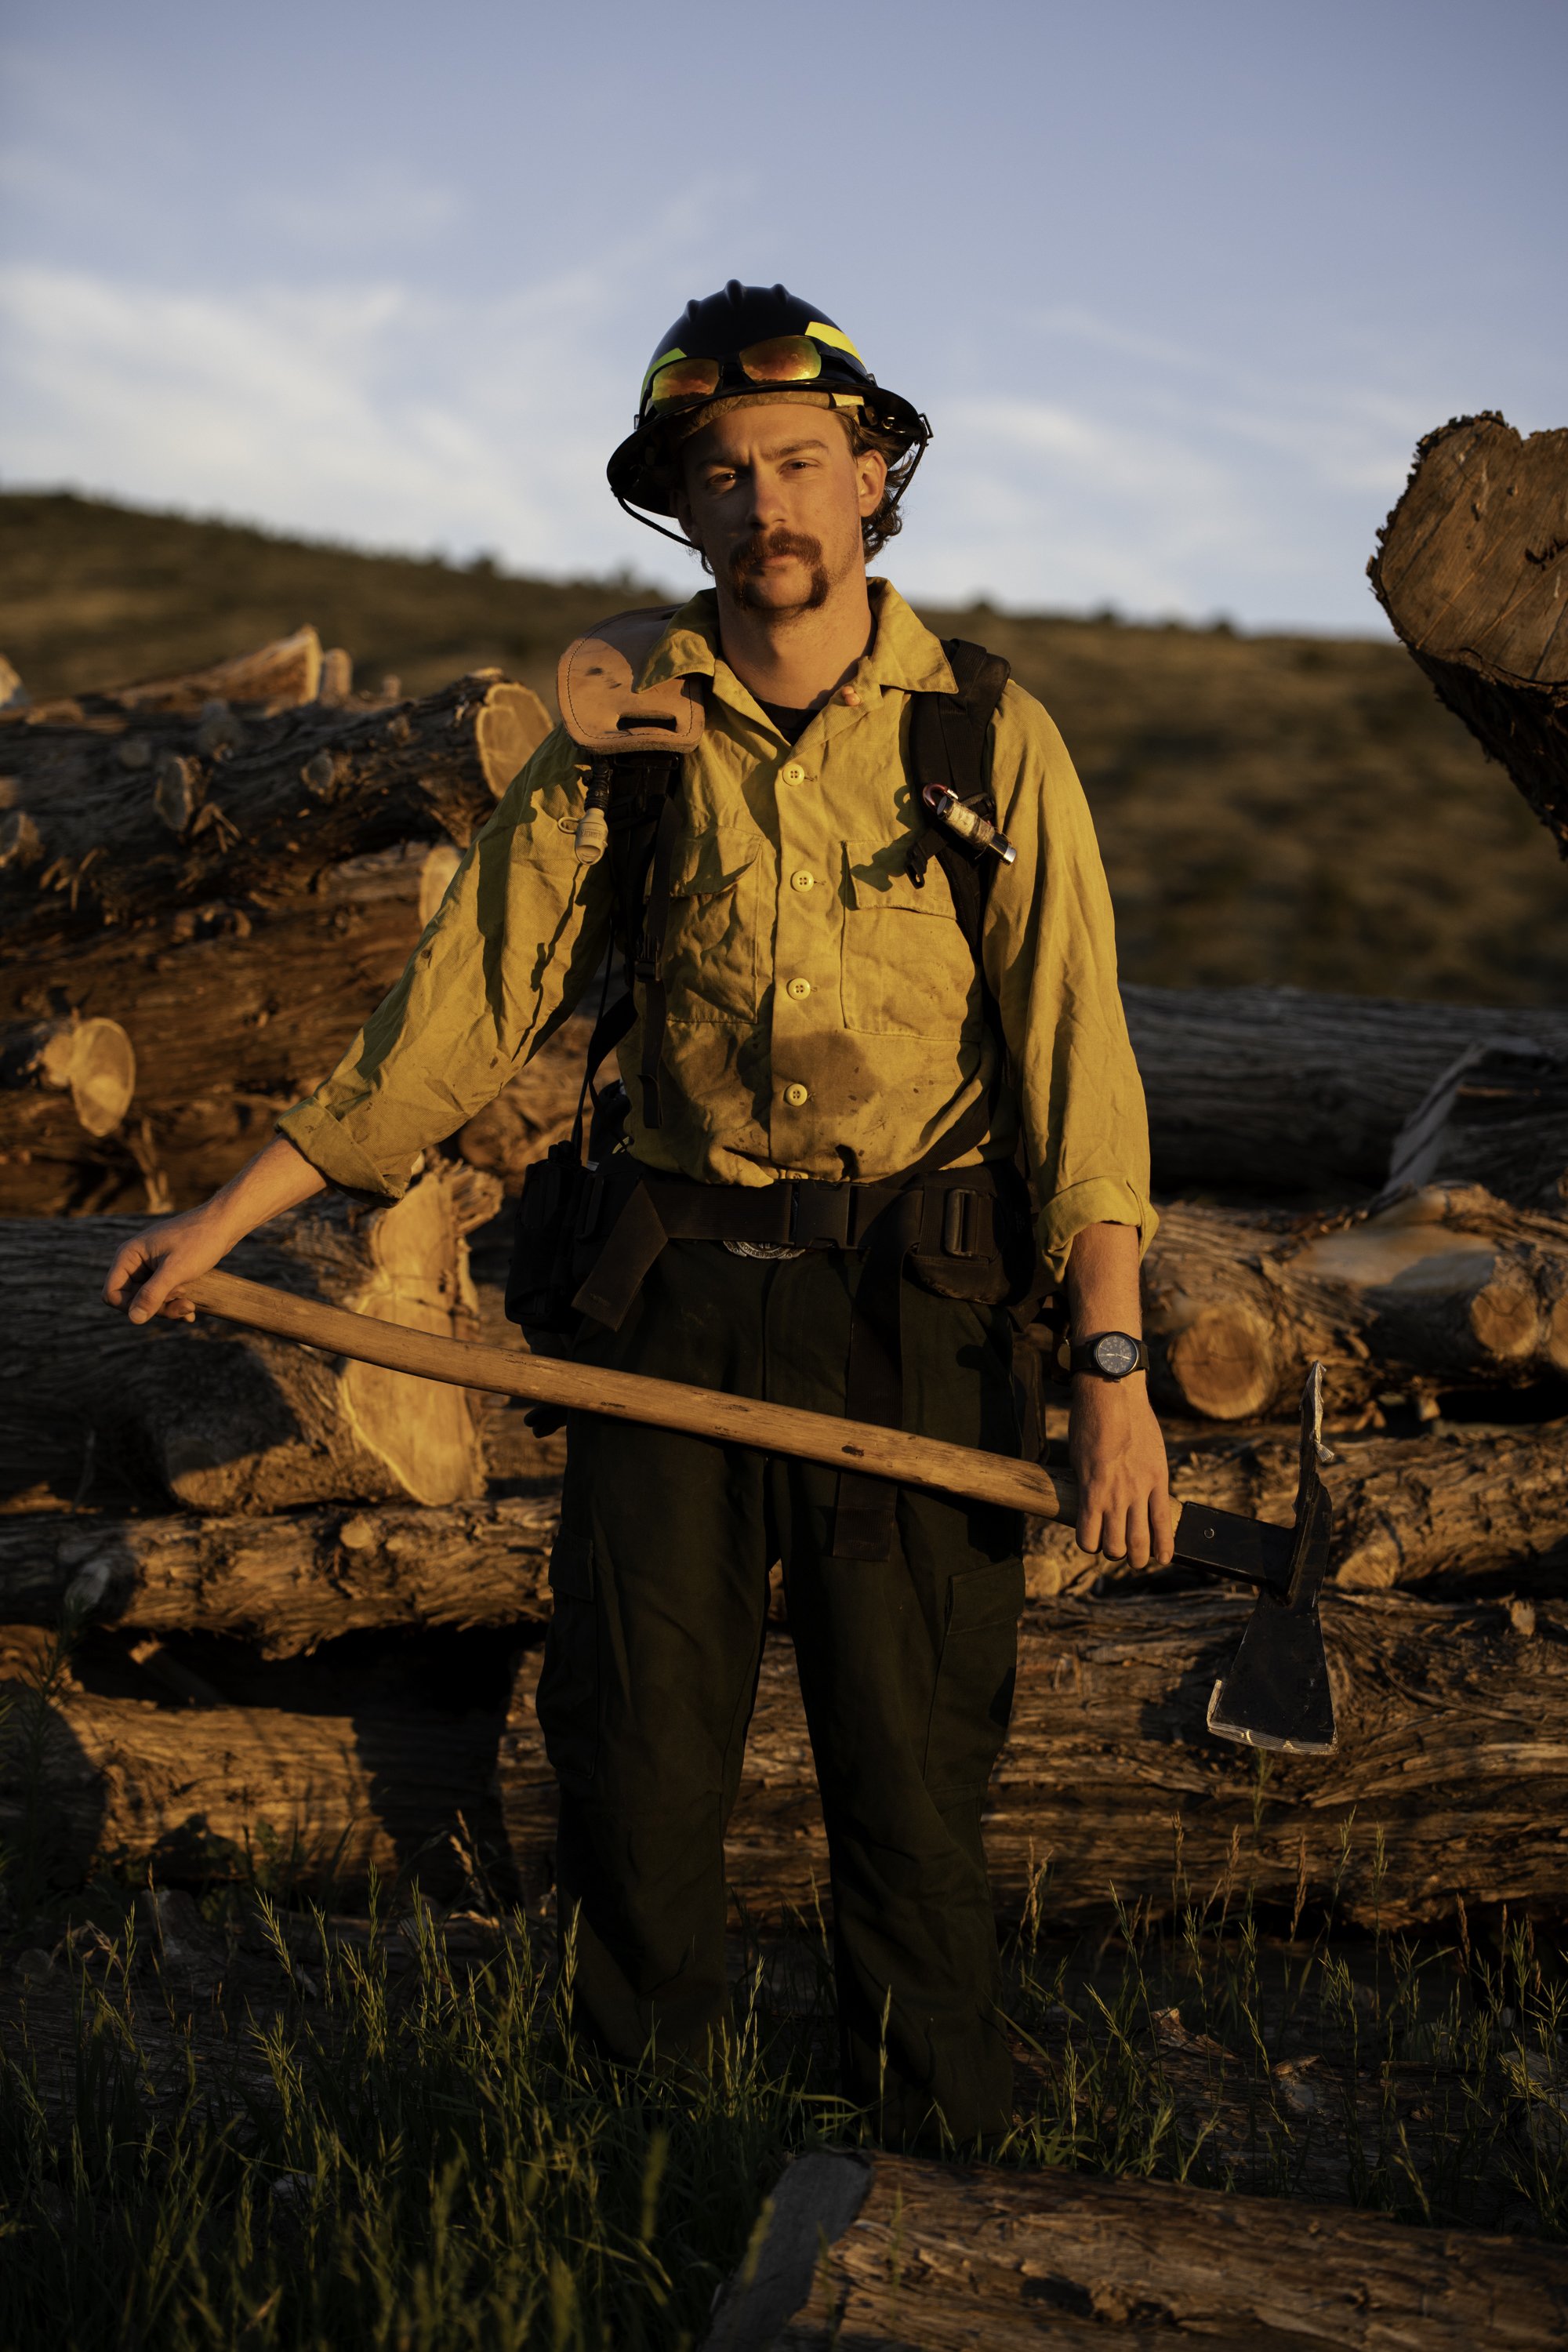  Ben Harper poses for a portrait at Philmont Scout Ranch on July 13, 2022 in Cimarron, N.M. Harper has worked for 12 seasons at Philmont over the last eight years and now volunteers as a wildland firefighter.  